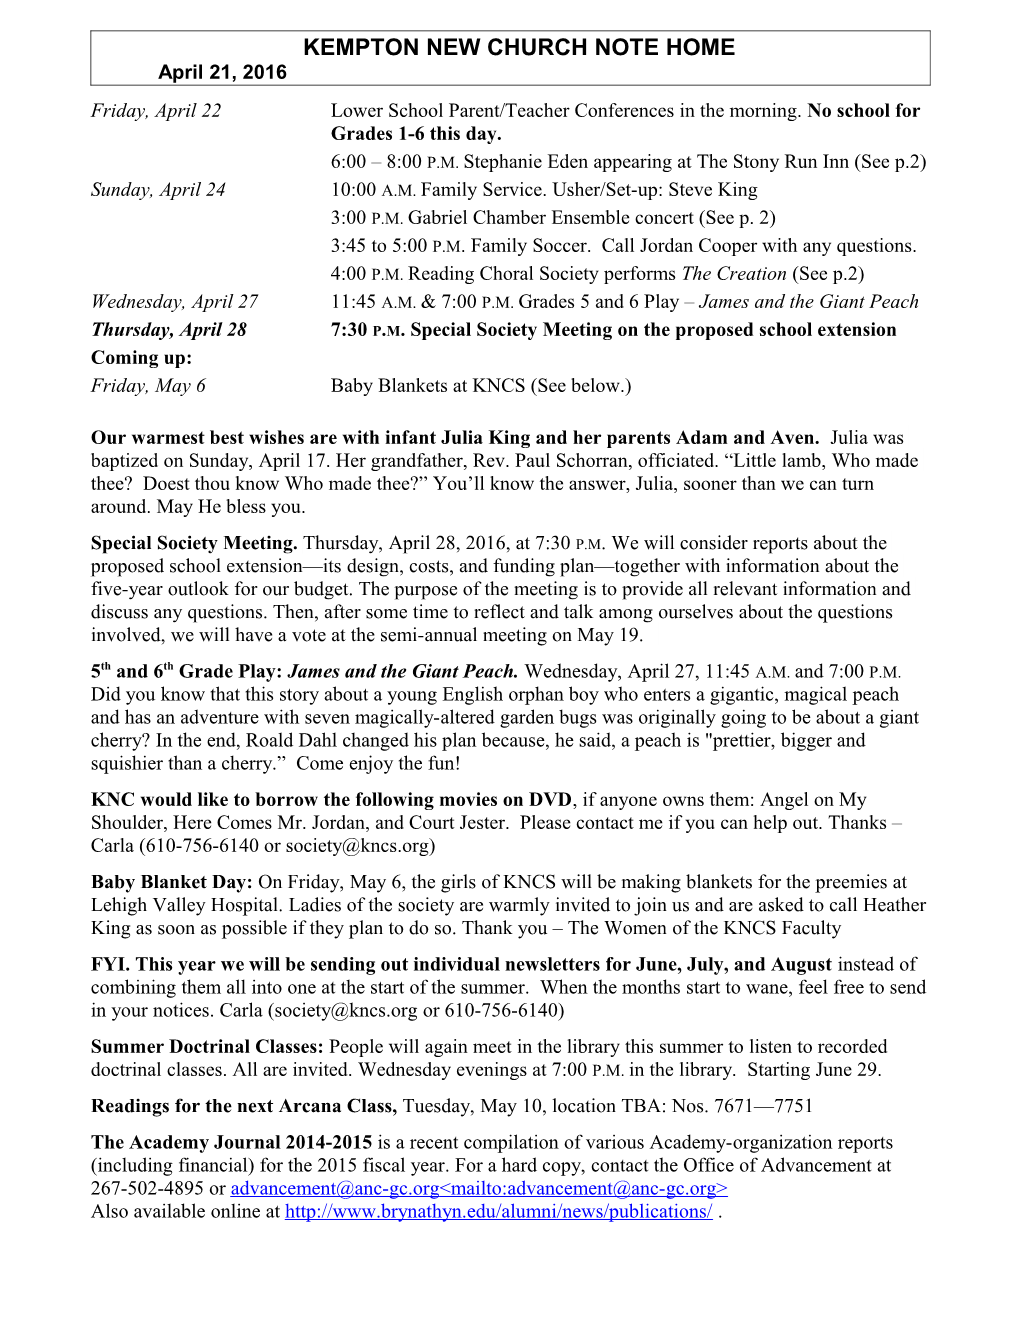 KEMPTON NEW CHURCH NOTE HOME April 21, 2016 Page 2